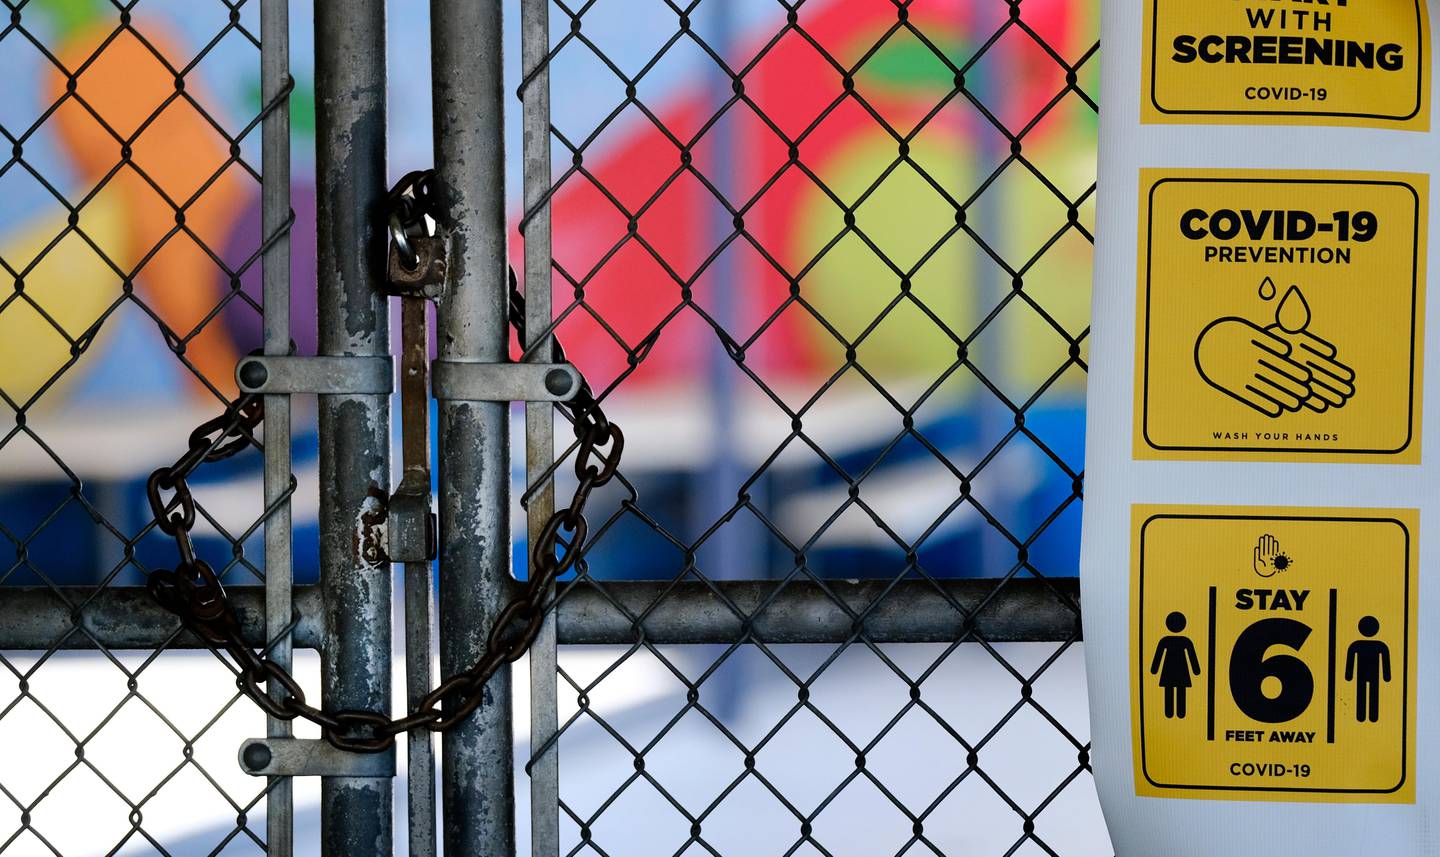 A chain-link fence lock is seen on a gate at a closed Ranchito Elementary School in the San Fernando Valley section of Los Angeles on Monday, July 13, 2020. Amid spiking coronavirus cases, Los Angeles Unified School District campuses will remain closed when classes resume in August, Superintendent Austin Beutner said Monday. (AP Photo/Richard Vogel)